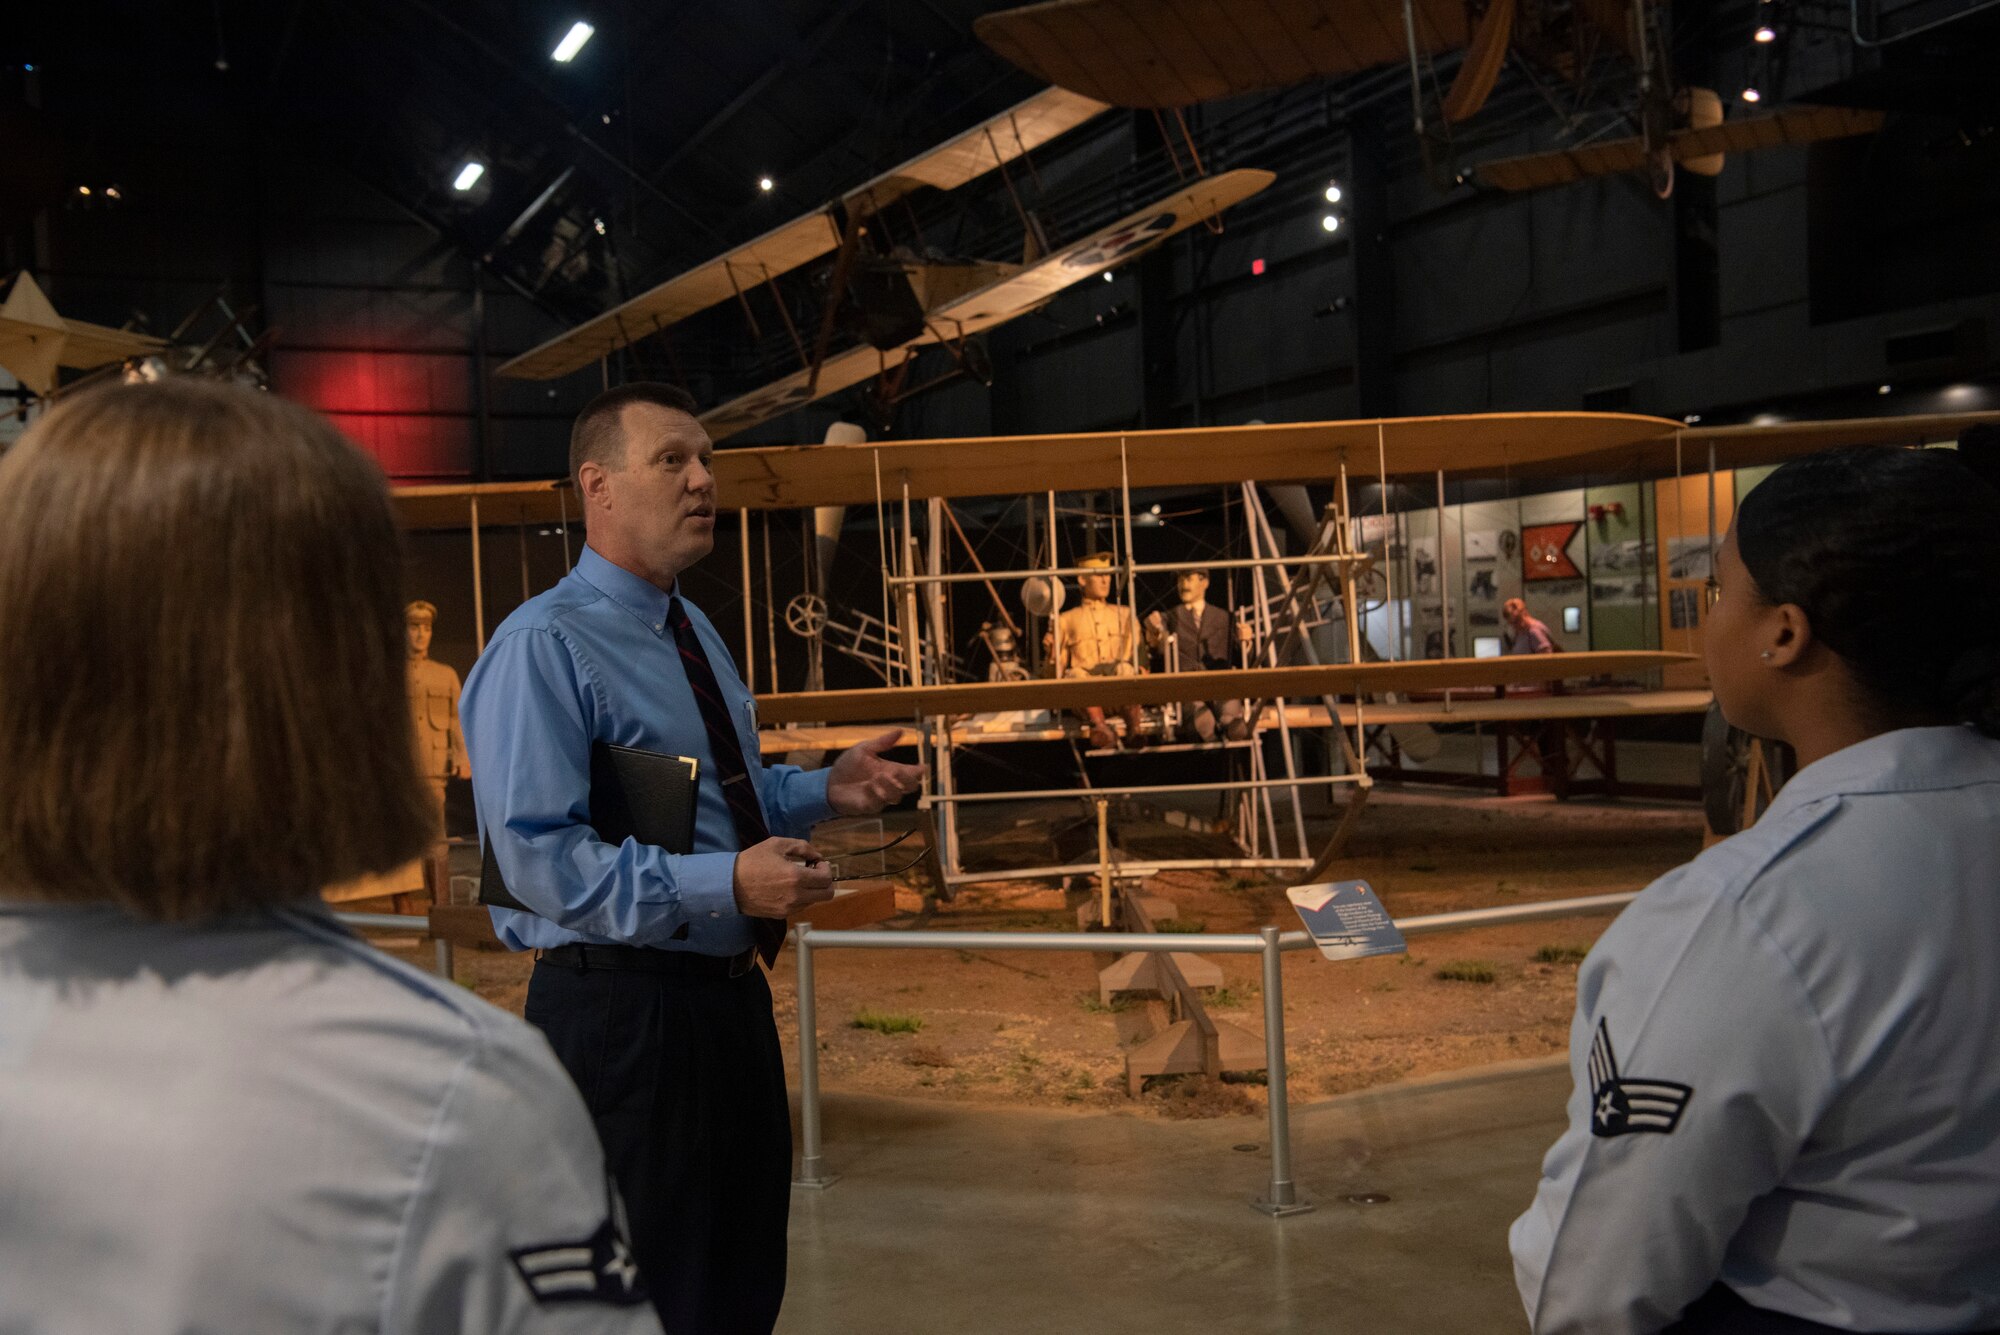 Dr. Doug Lantry, The National Museum of the U.S. Air Force historian, gives Airmen from the 90th Missile Wing a tour of the museum during their heritage and teamwork trip Sept. 4, 2019, at Wright-Patterson Air Force Base, Ohio. The trip allowed Airmen to receive a greater insite into the history of the ICBM history and air power. (U.S. Air Force photo by Senior Airman Abbigayle Williams)